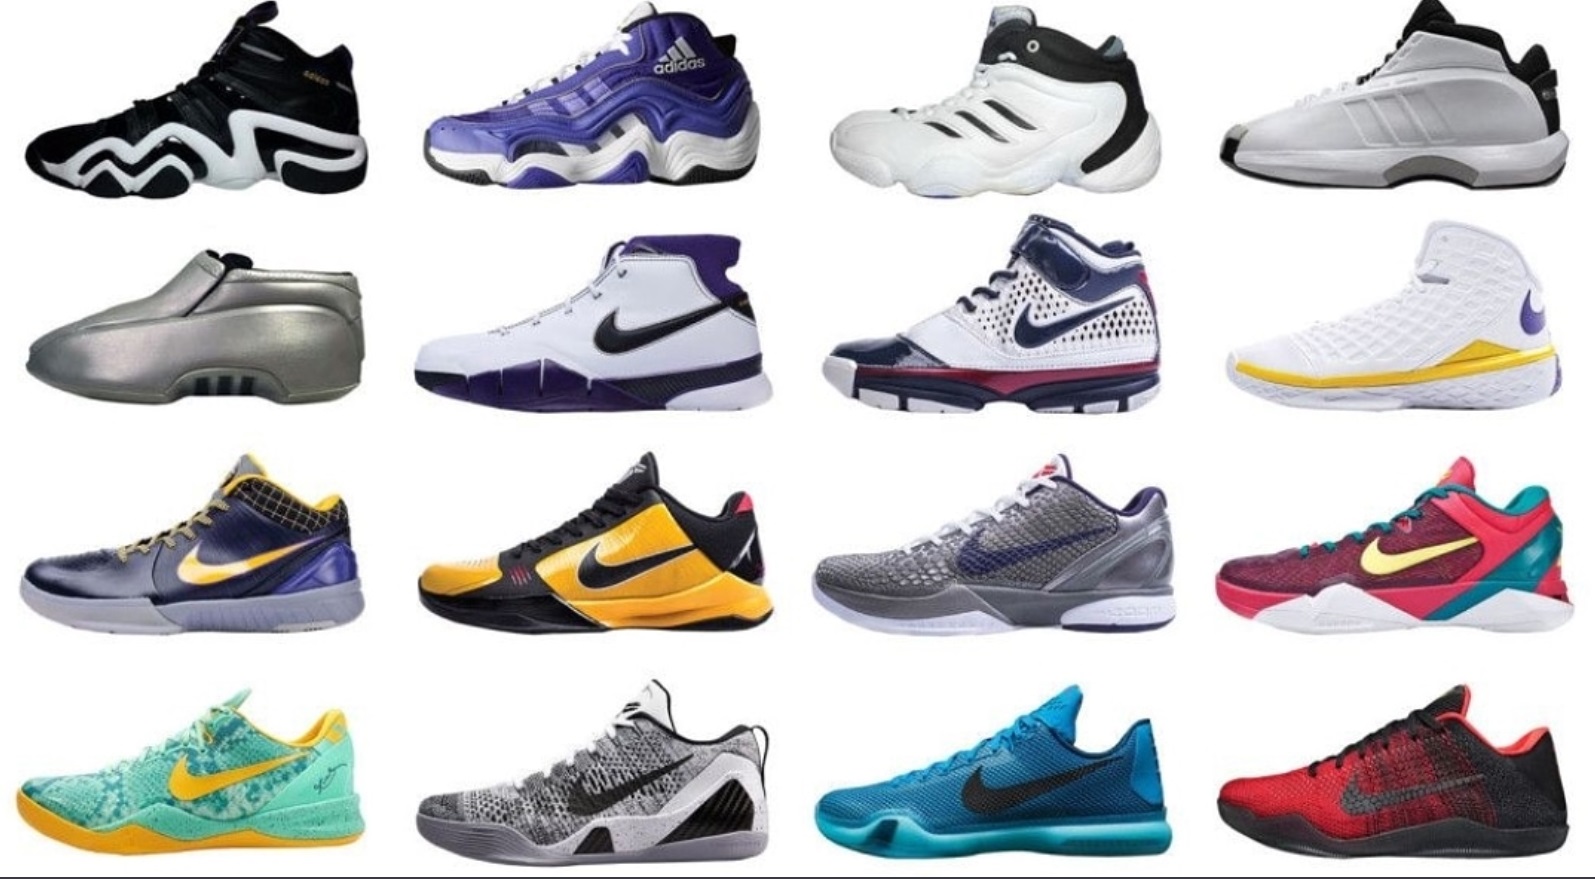 PHOTO All Of Kobe's Signature Shoes Through The Years